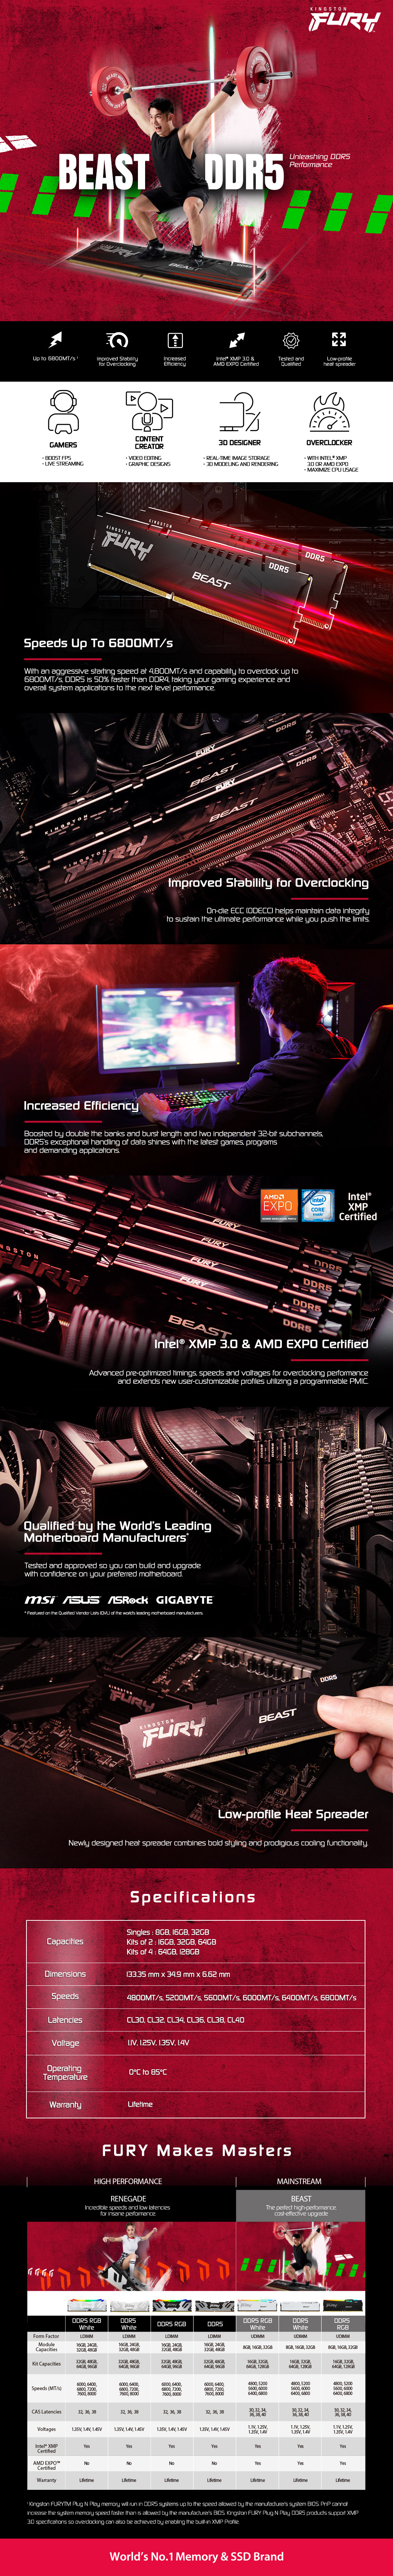 A large marketing image providing additional information about the product Kingston 32GB Kit (2x16GB) DDR5 Fury Beast EXPO/XMP CL30 6000MHz - Additional alt info not provided